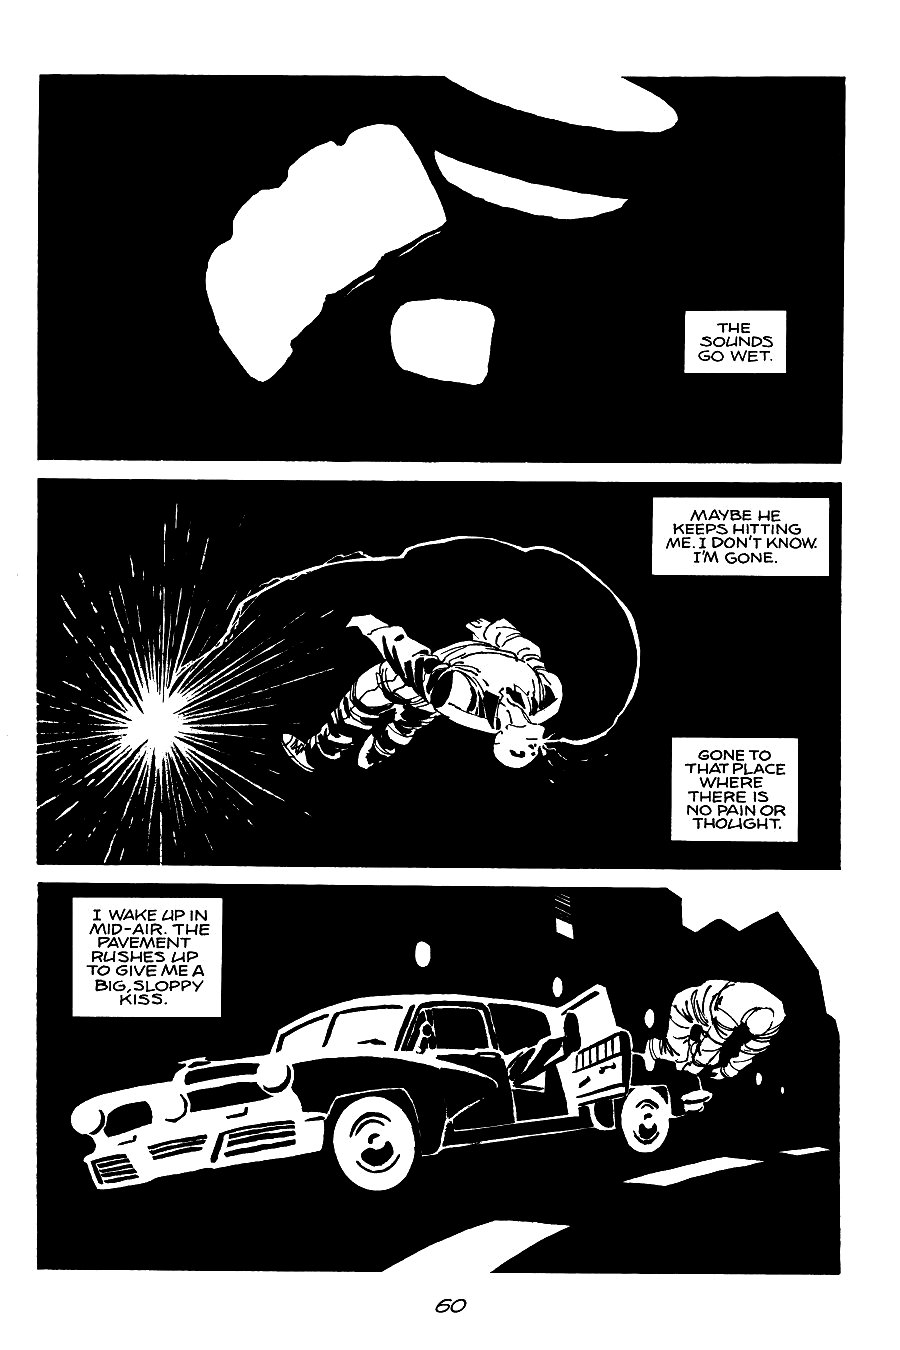 page 60 of sin city 2 the hard goodbye